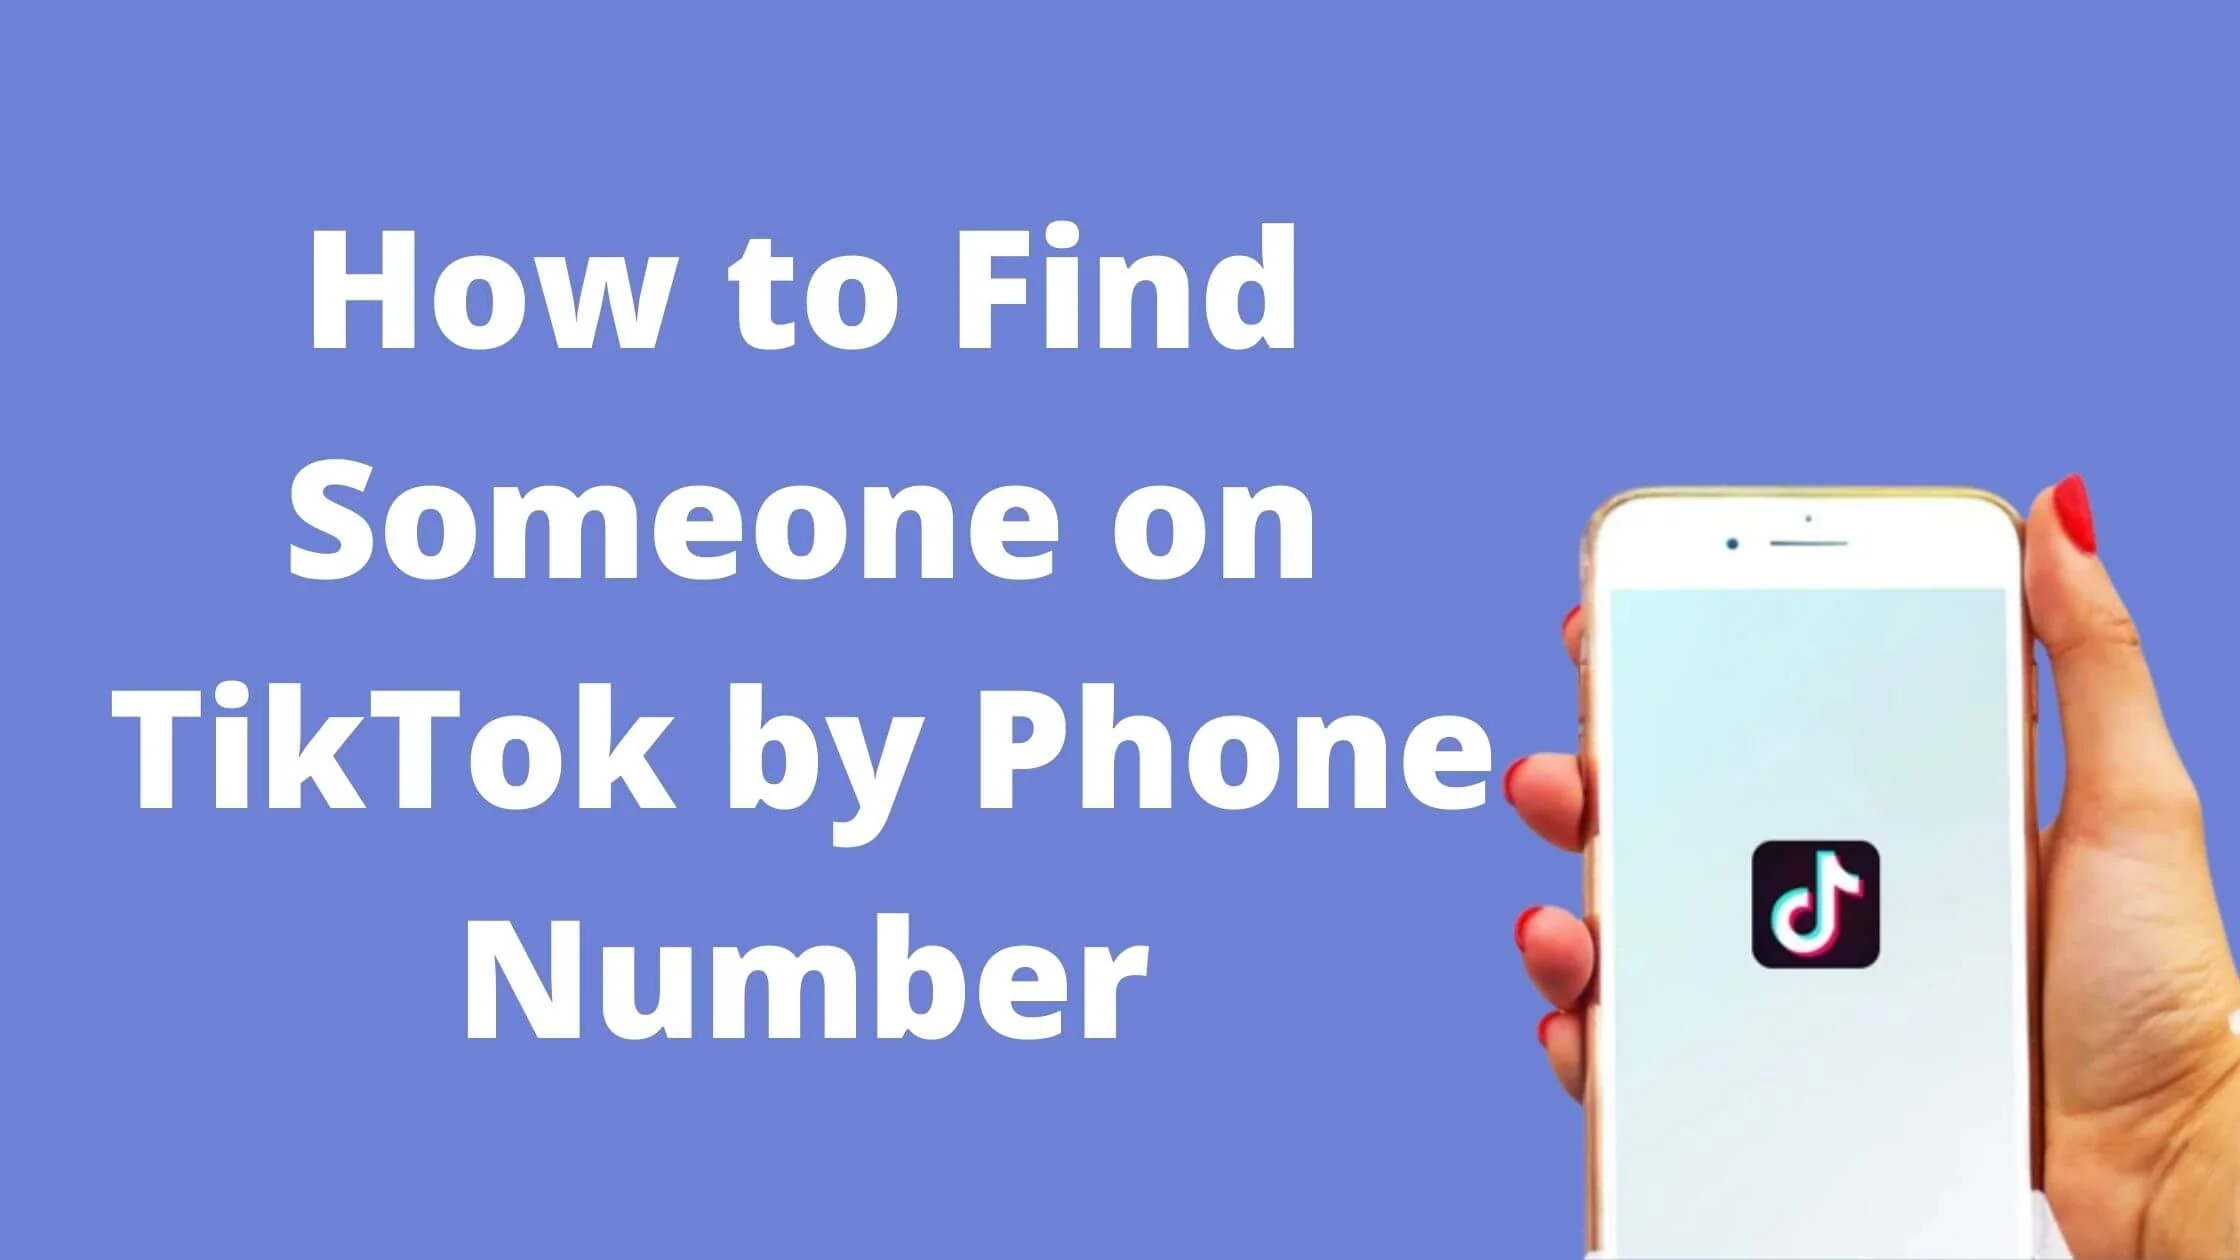 How to Find Someone on TikTok by Phone Number